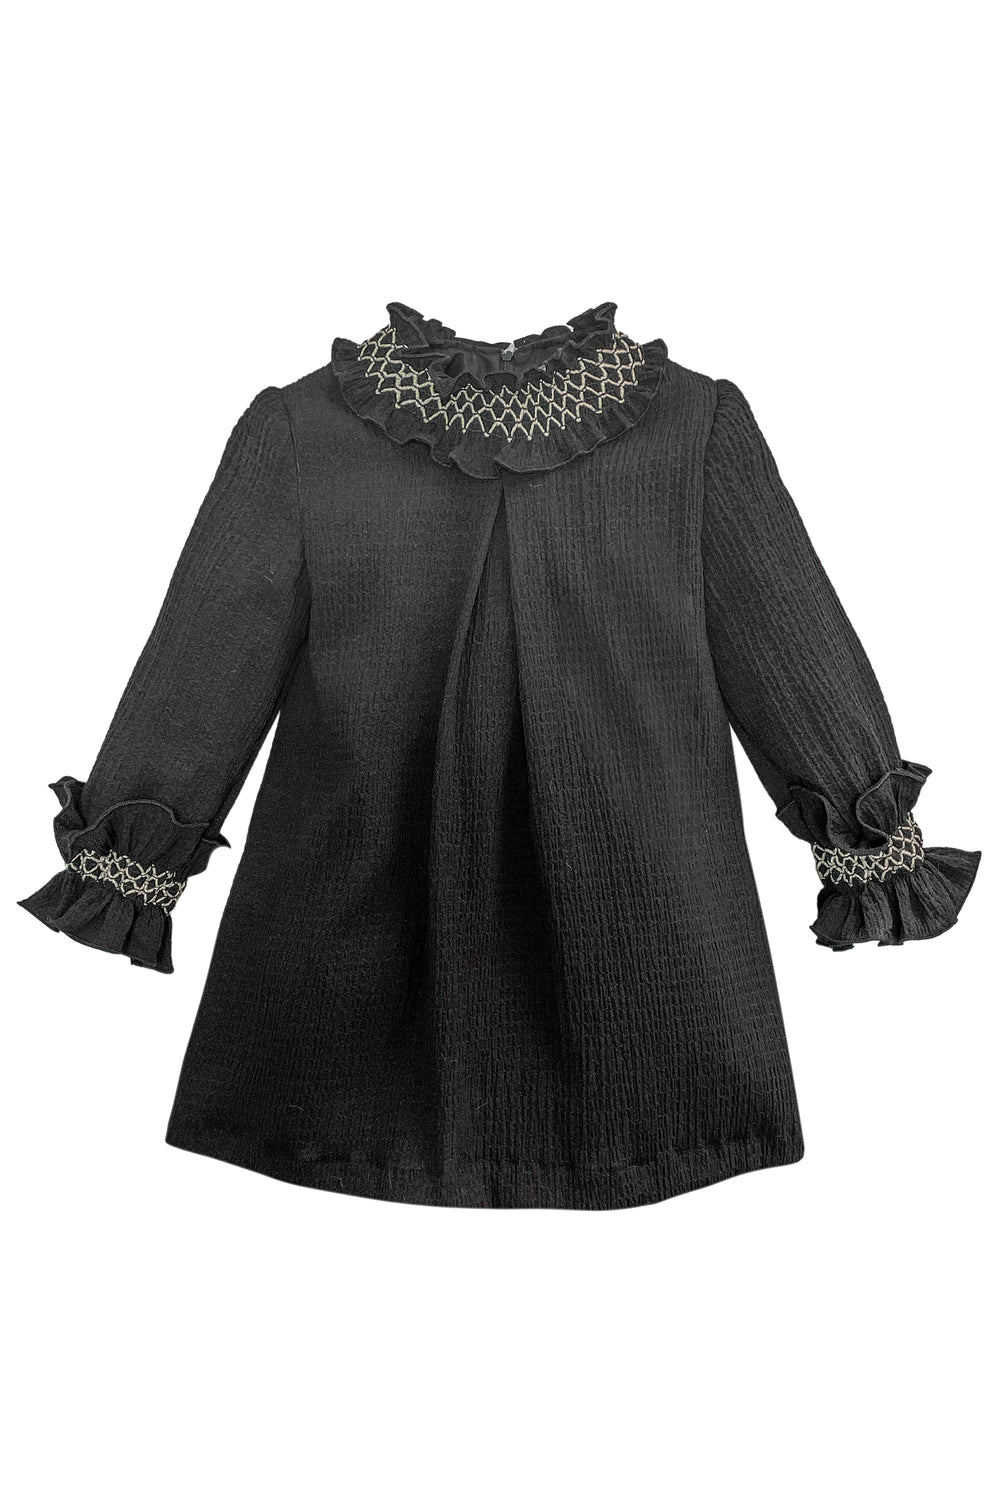 Eve Children "Marlena" Black Cheesecloth Smocked Dress | Millie and John